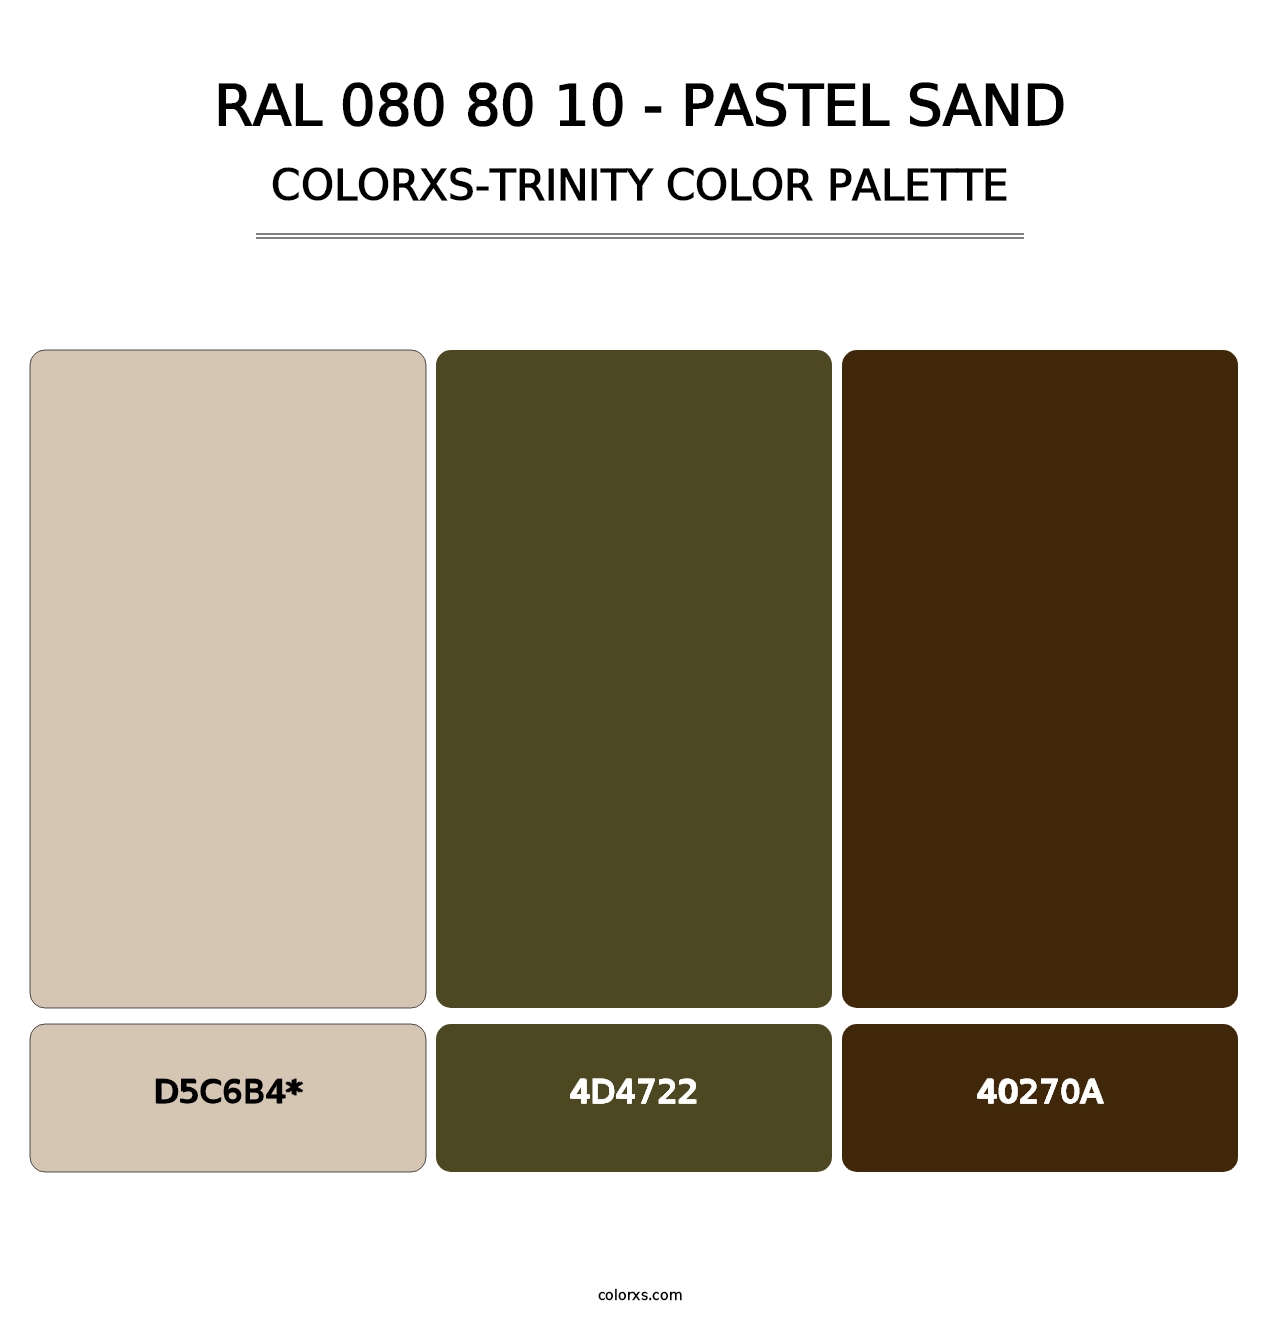 RAL 080 80 10 - Pastel Sand - Colorxs Trinity Palette